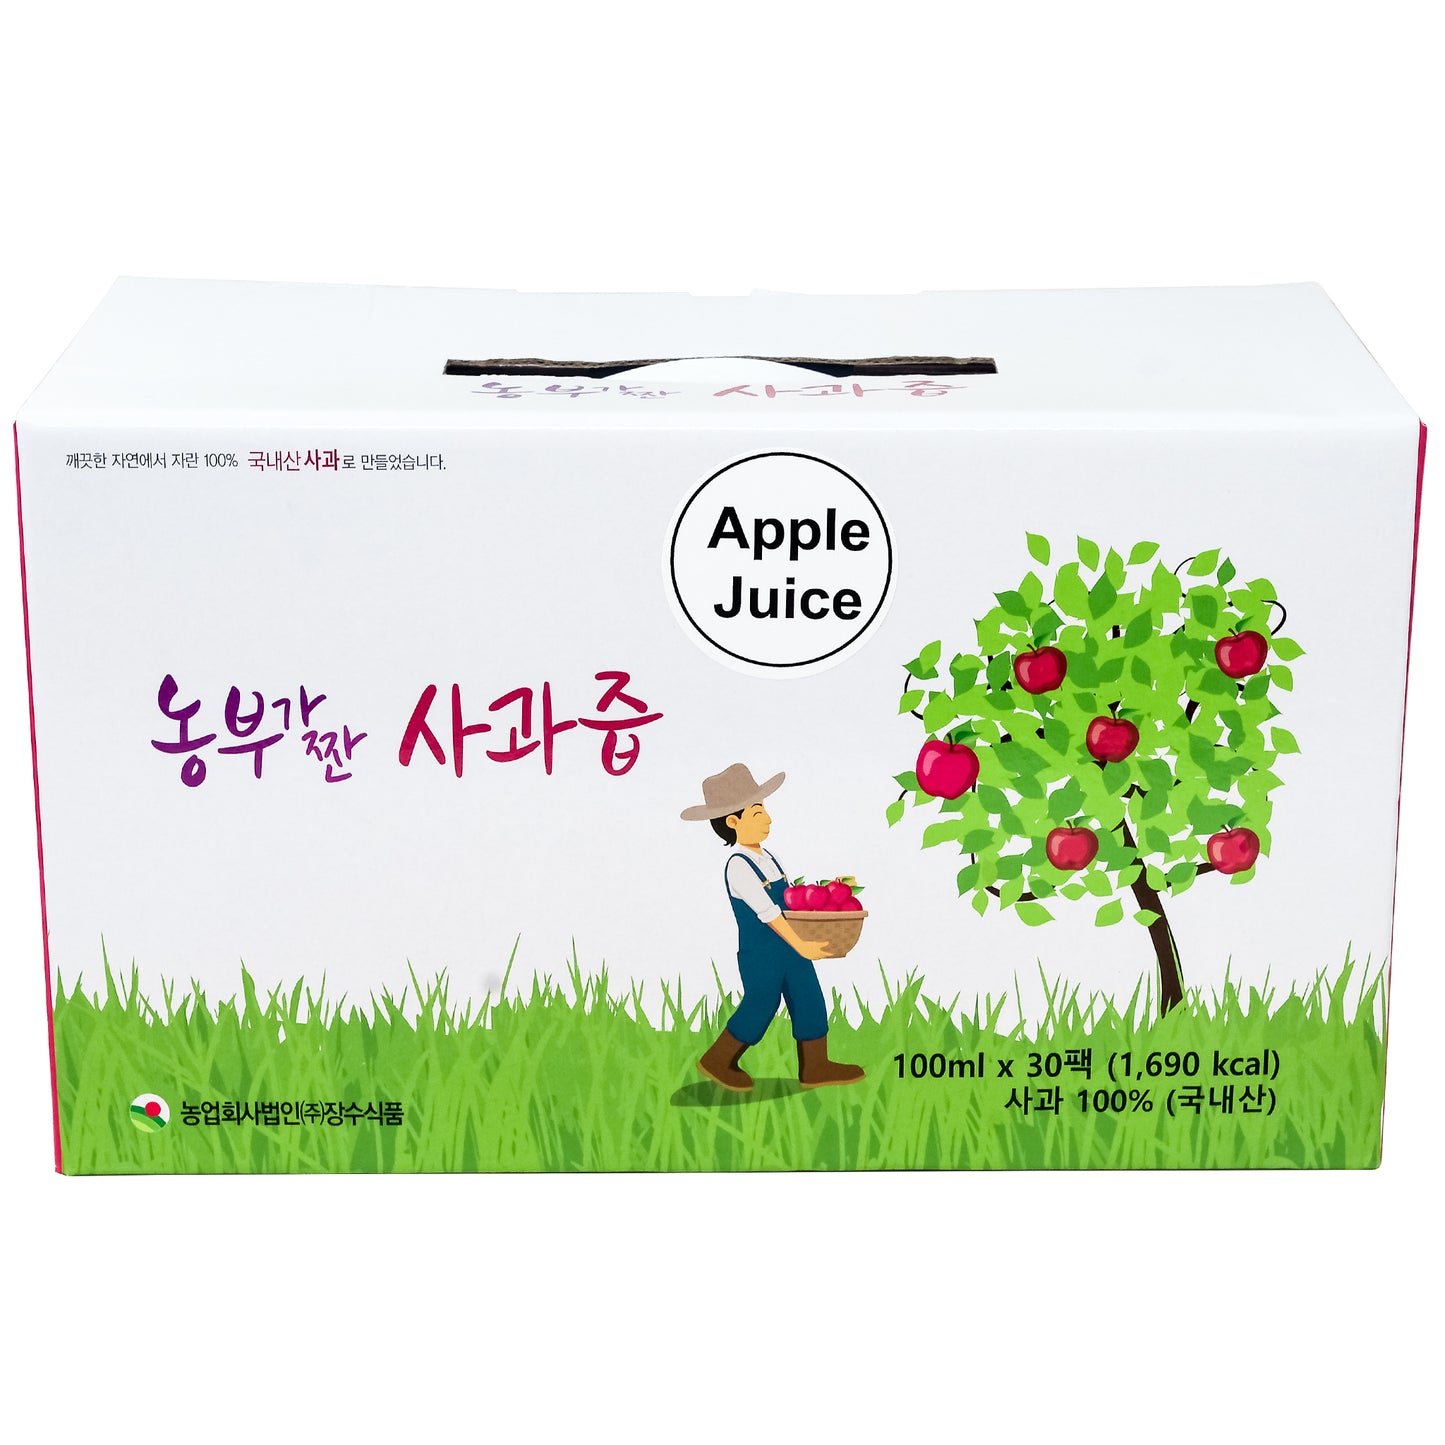 Farmers 100% Apple Juice, 100ml (3.4oz)  [ 30 Pouches ] Ready to Drink, ON-THE-GO Adult, Kids Healthy Juice, Beverage Rich in Vitamin C